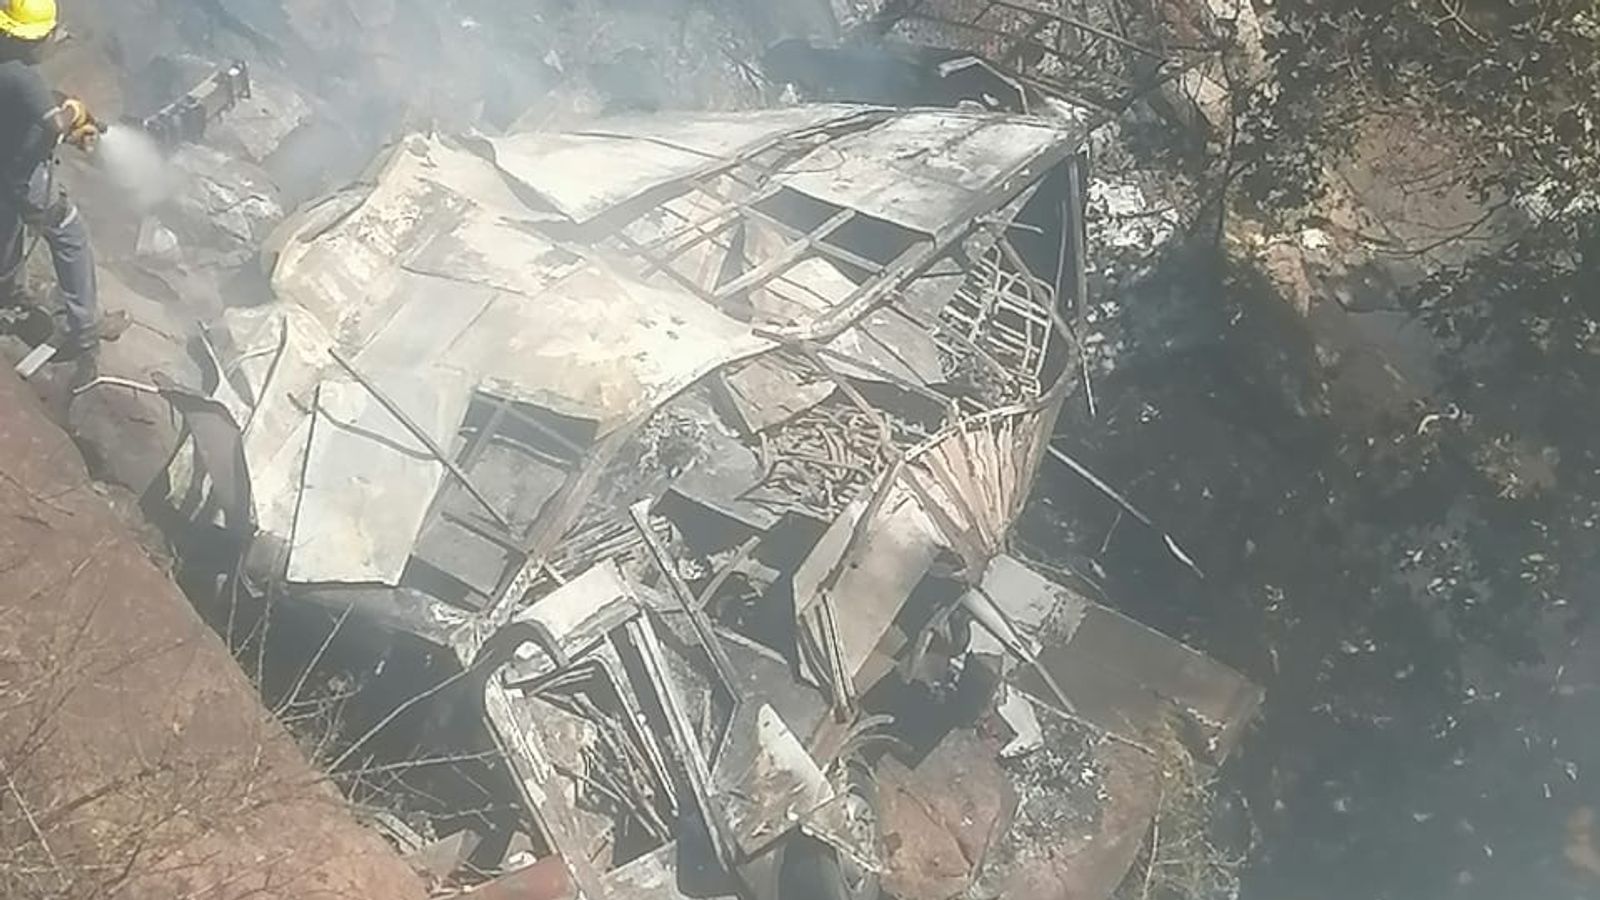 At least 45 people killed in South Africa bus crash